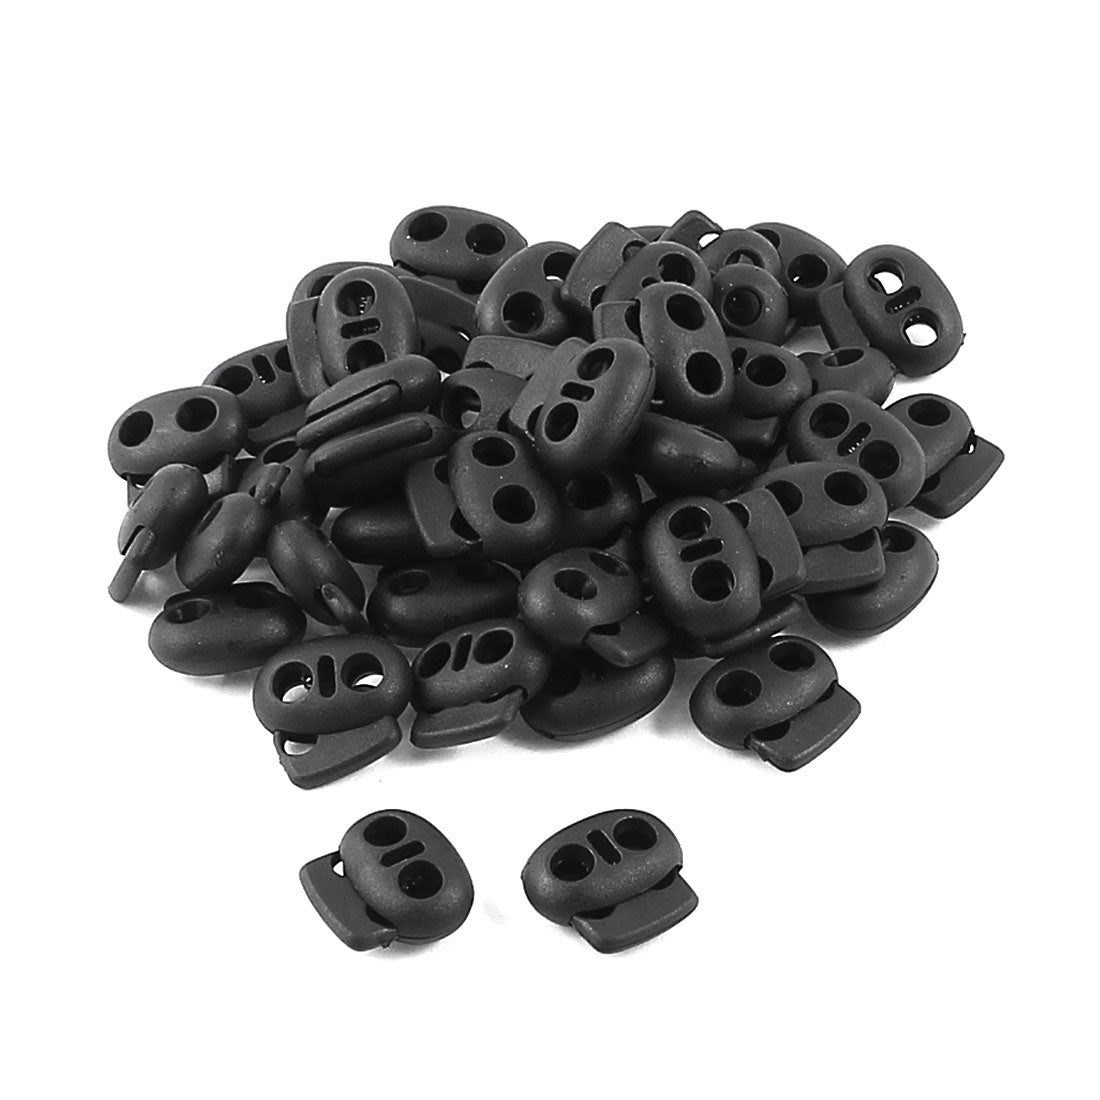 uxcell Uxcell Black Plastic 3mm Dia Double Holes Spring Loaded Clamps Clip Drawstring Rope Cord Lock Stoppers Toggles 50pcs